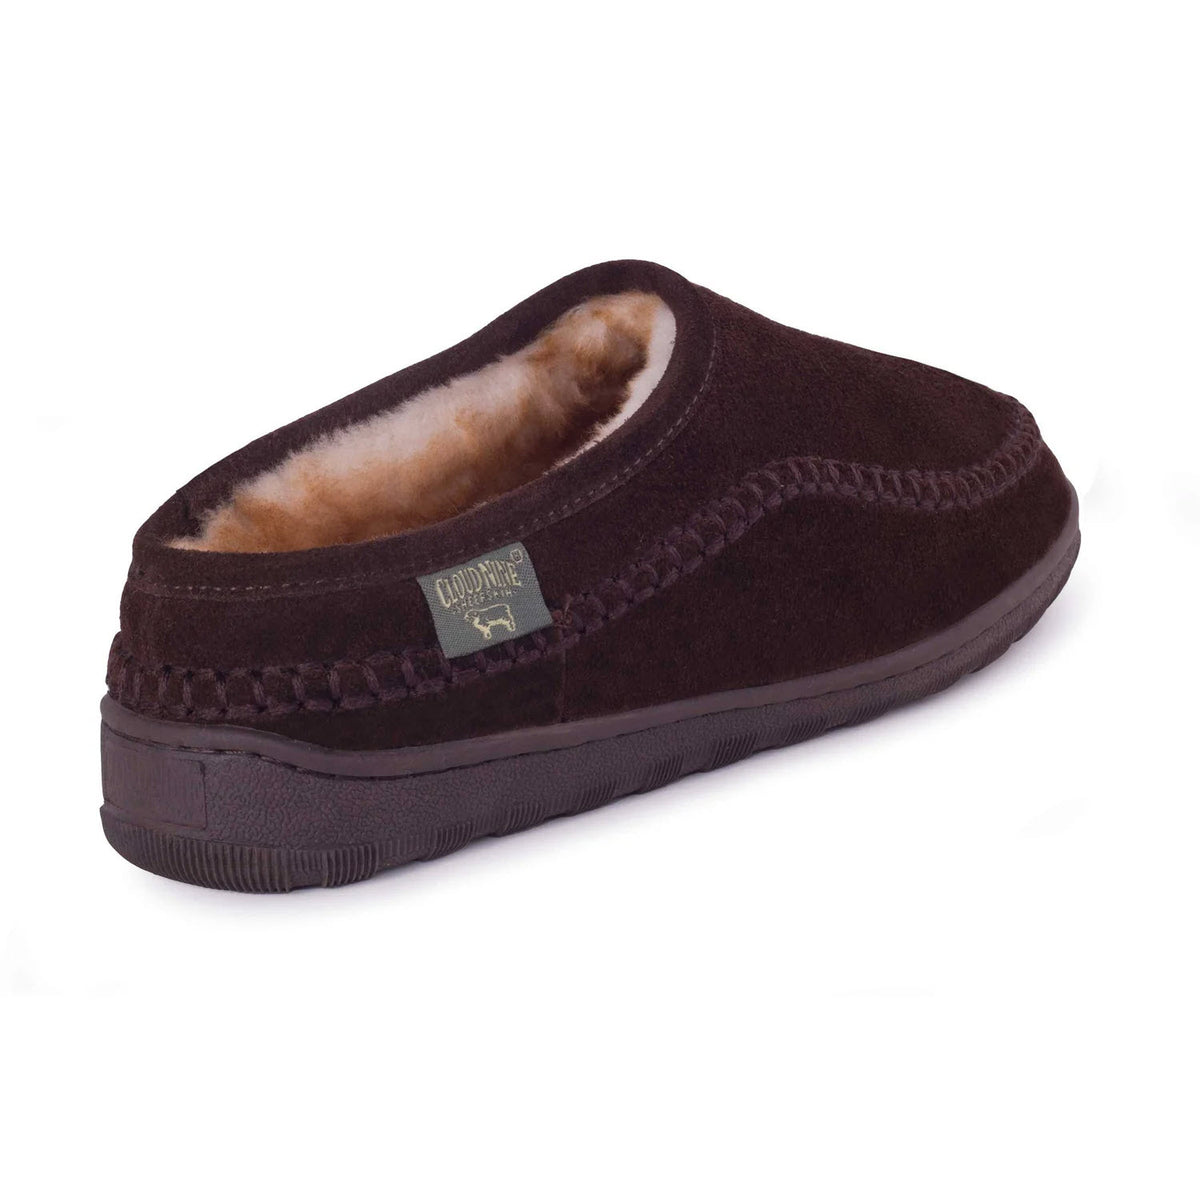 A dark brown, suede Cloud Nine Pacific slide by Deer Stags with a plush lining and a thick rubber sole, isolated on a white background.